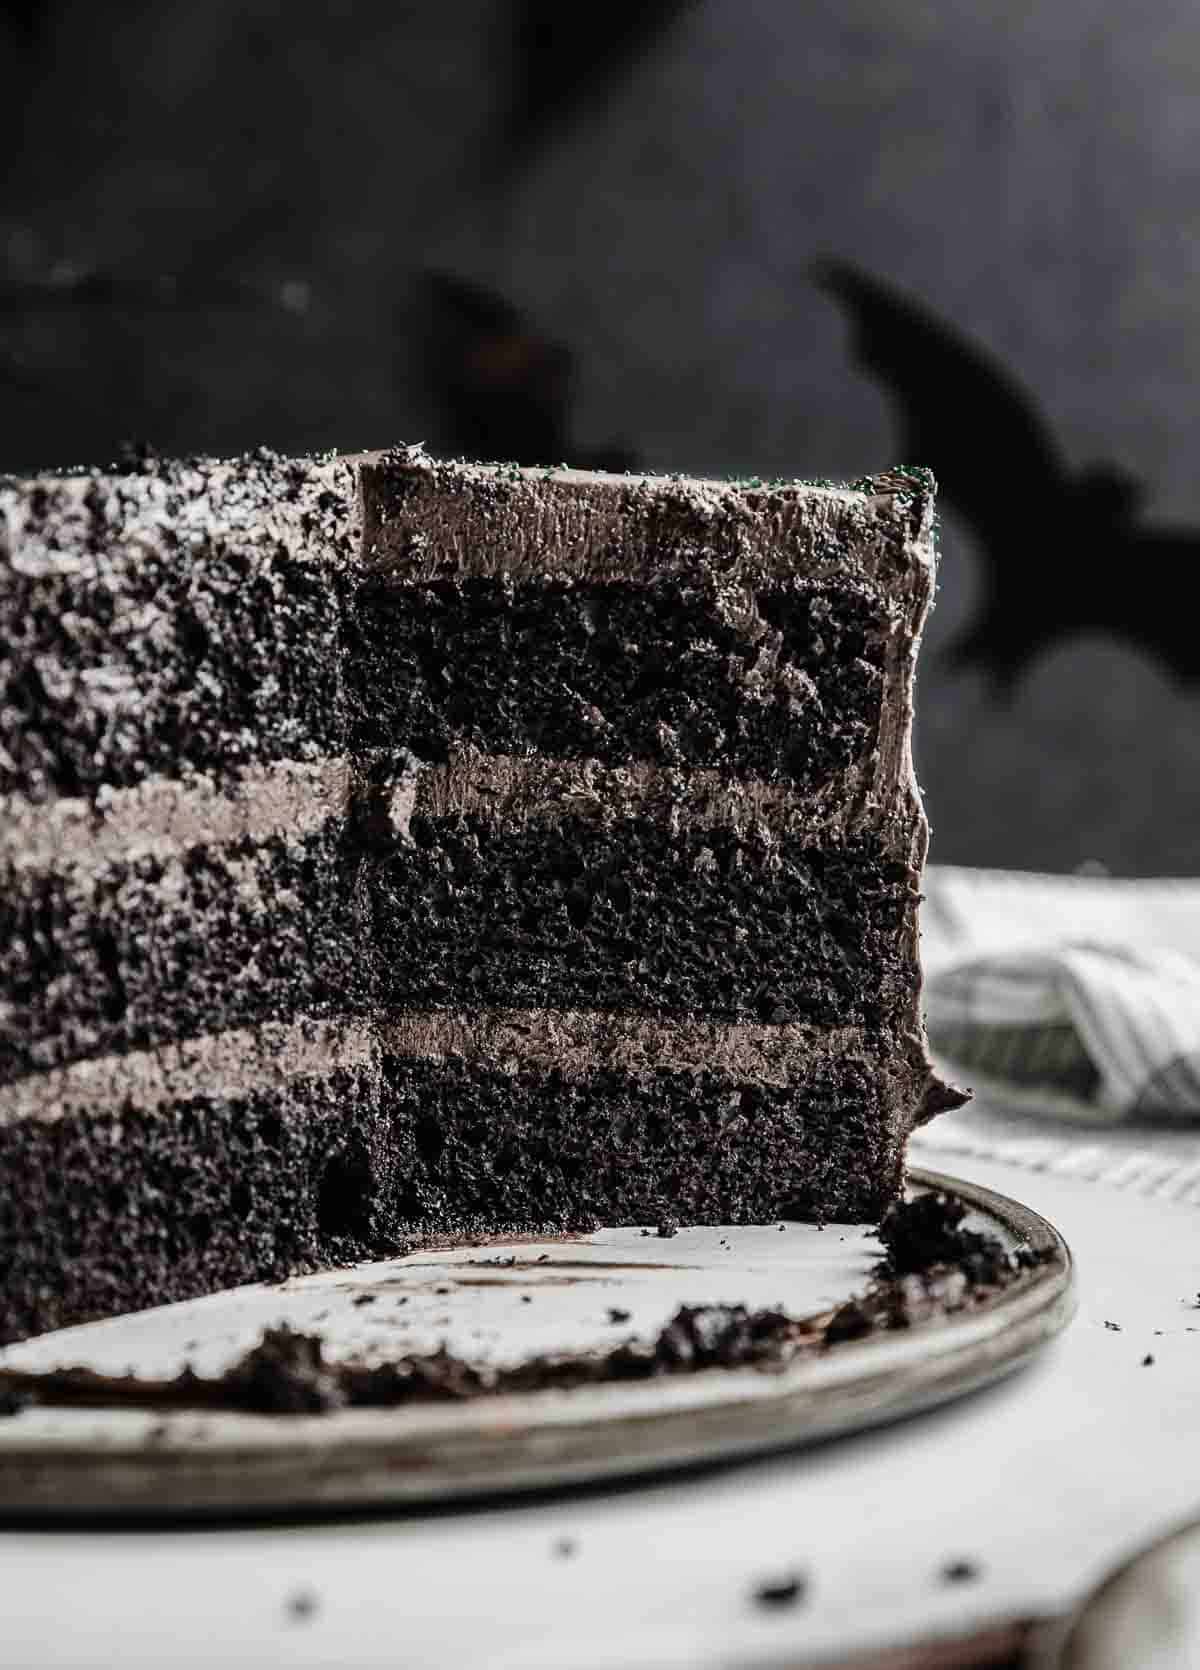 A Black Velvet Cake with several slices of cake removed to show the interior of the three tiered black layer cake.